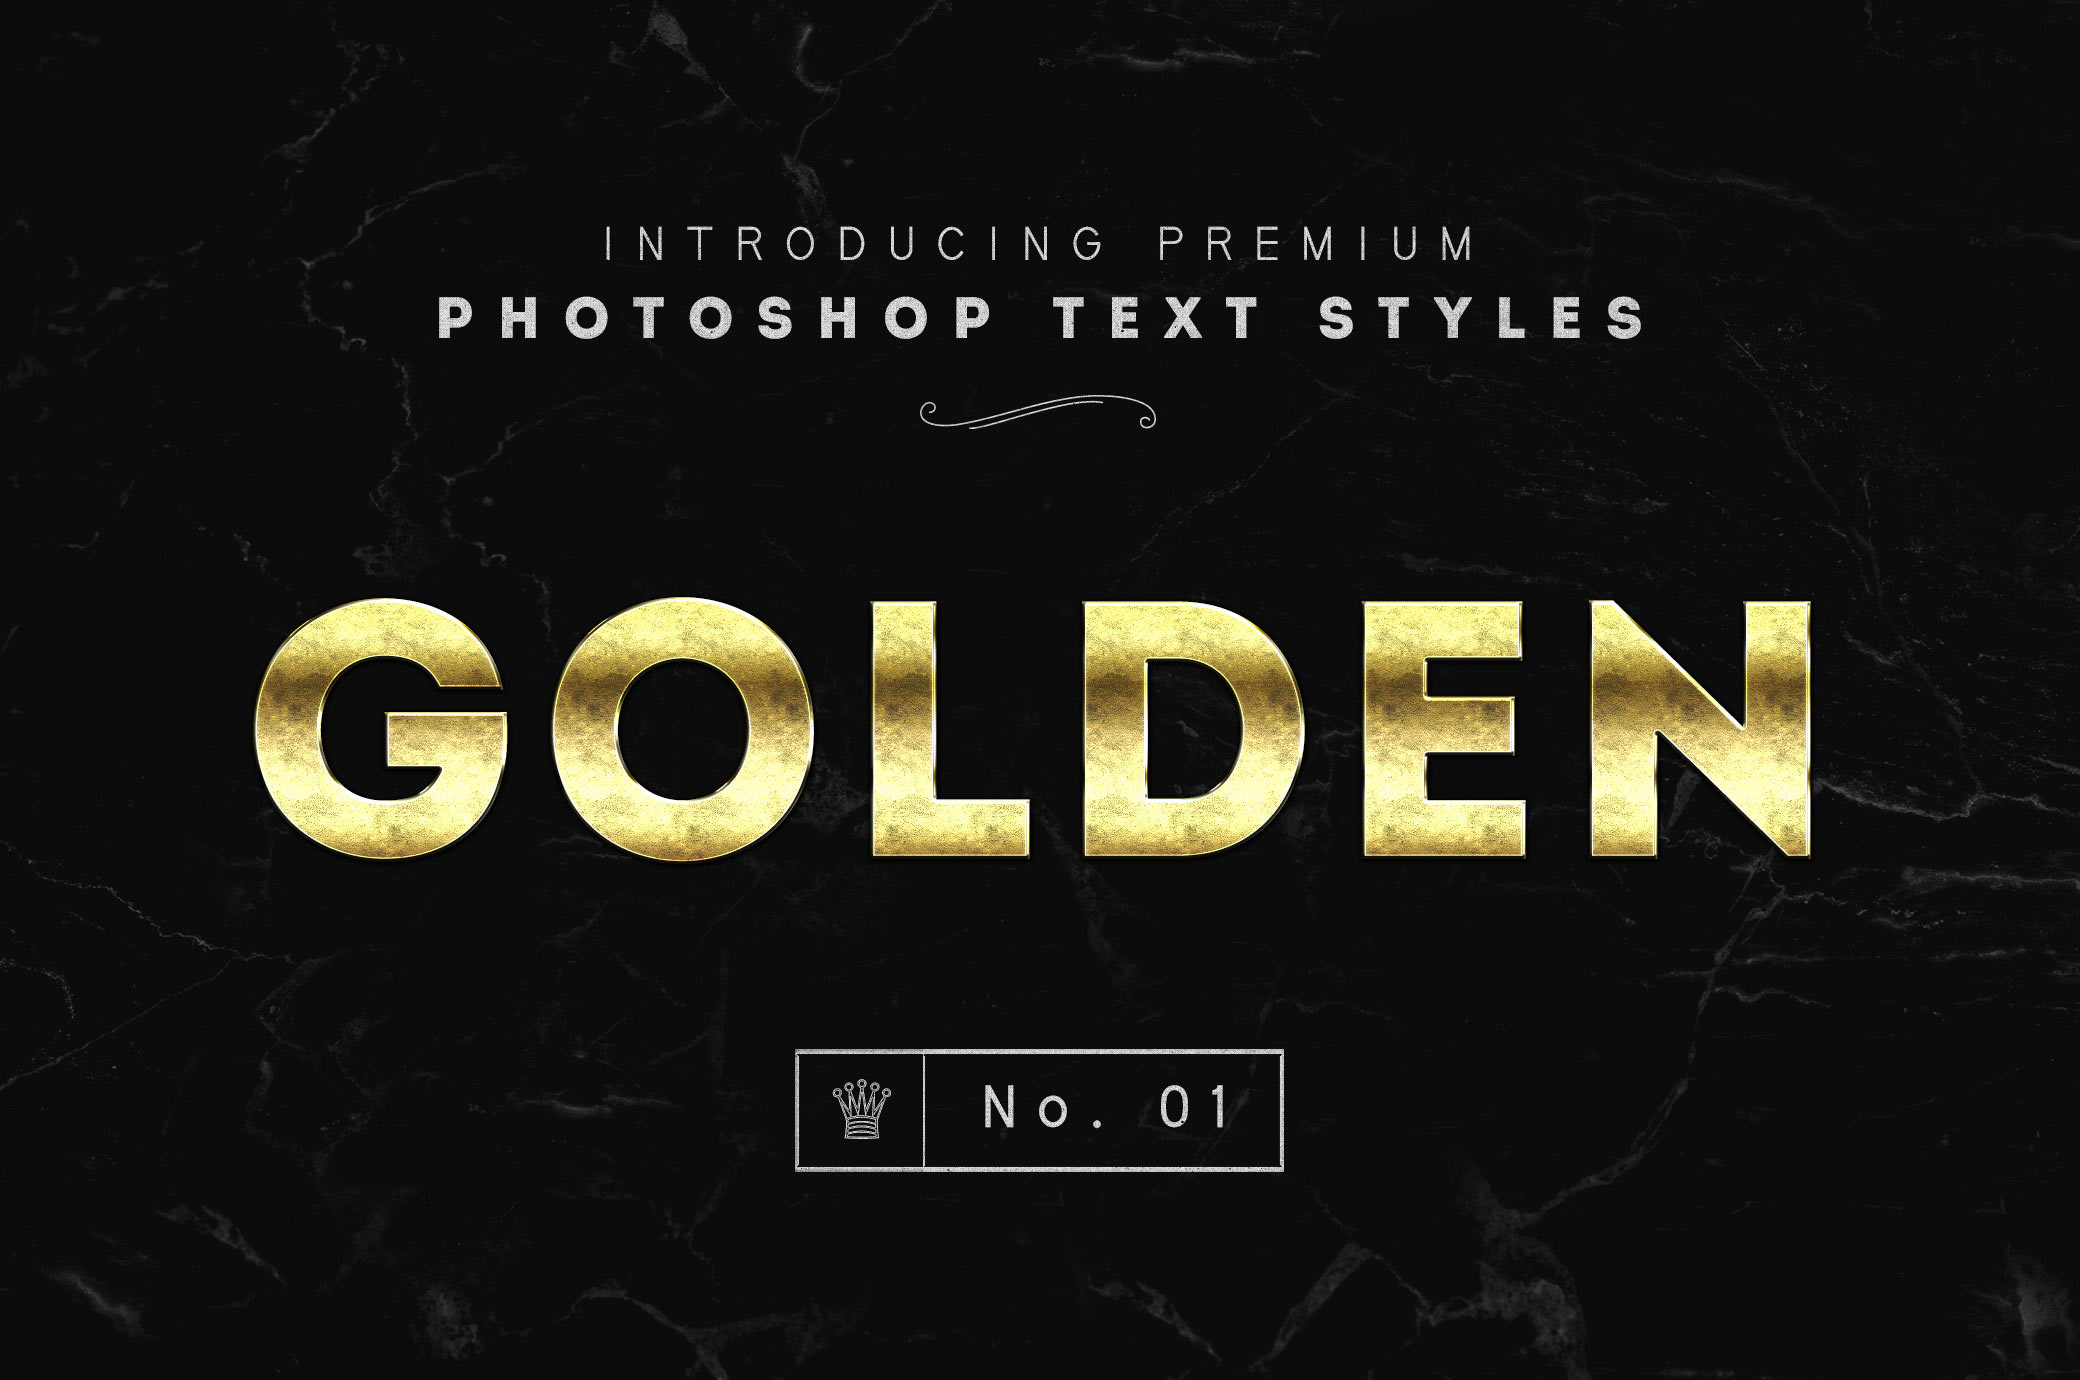 photoshop gold text download